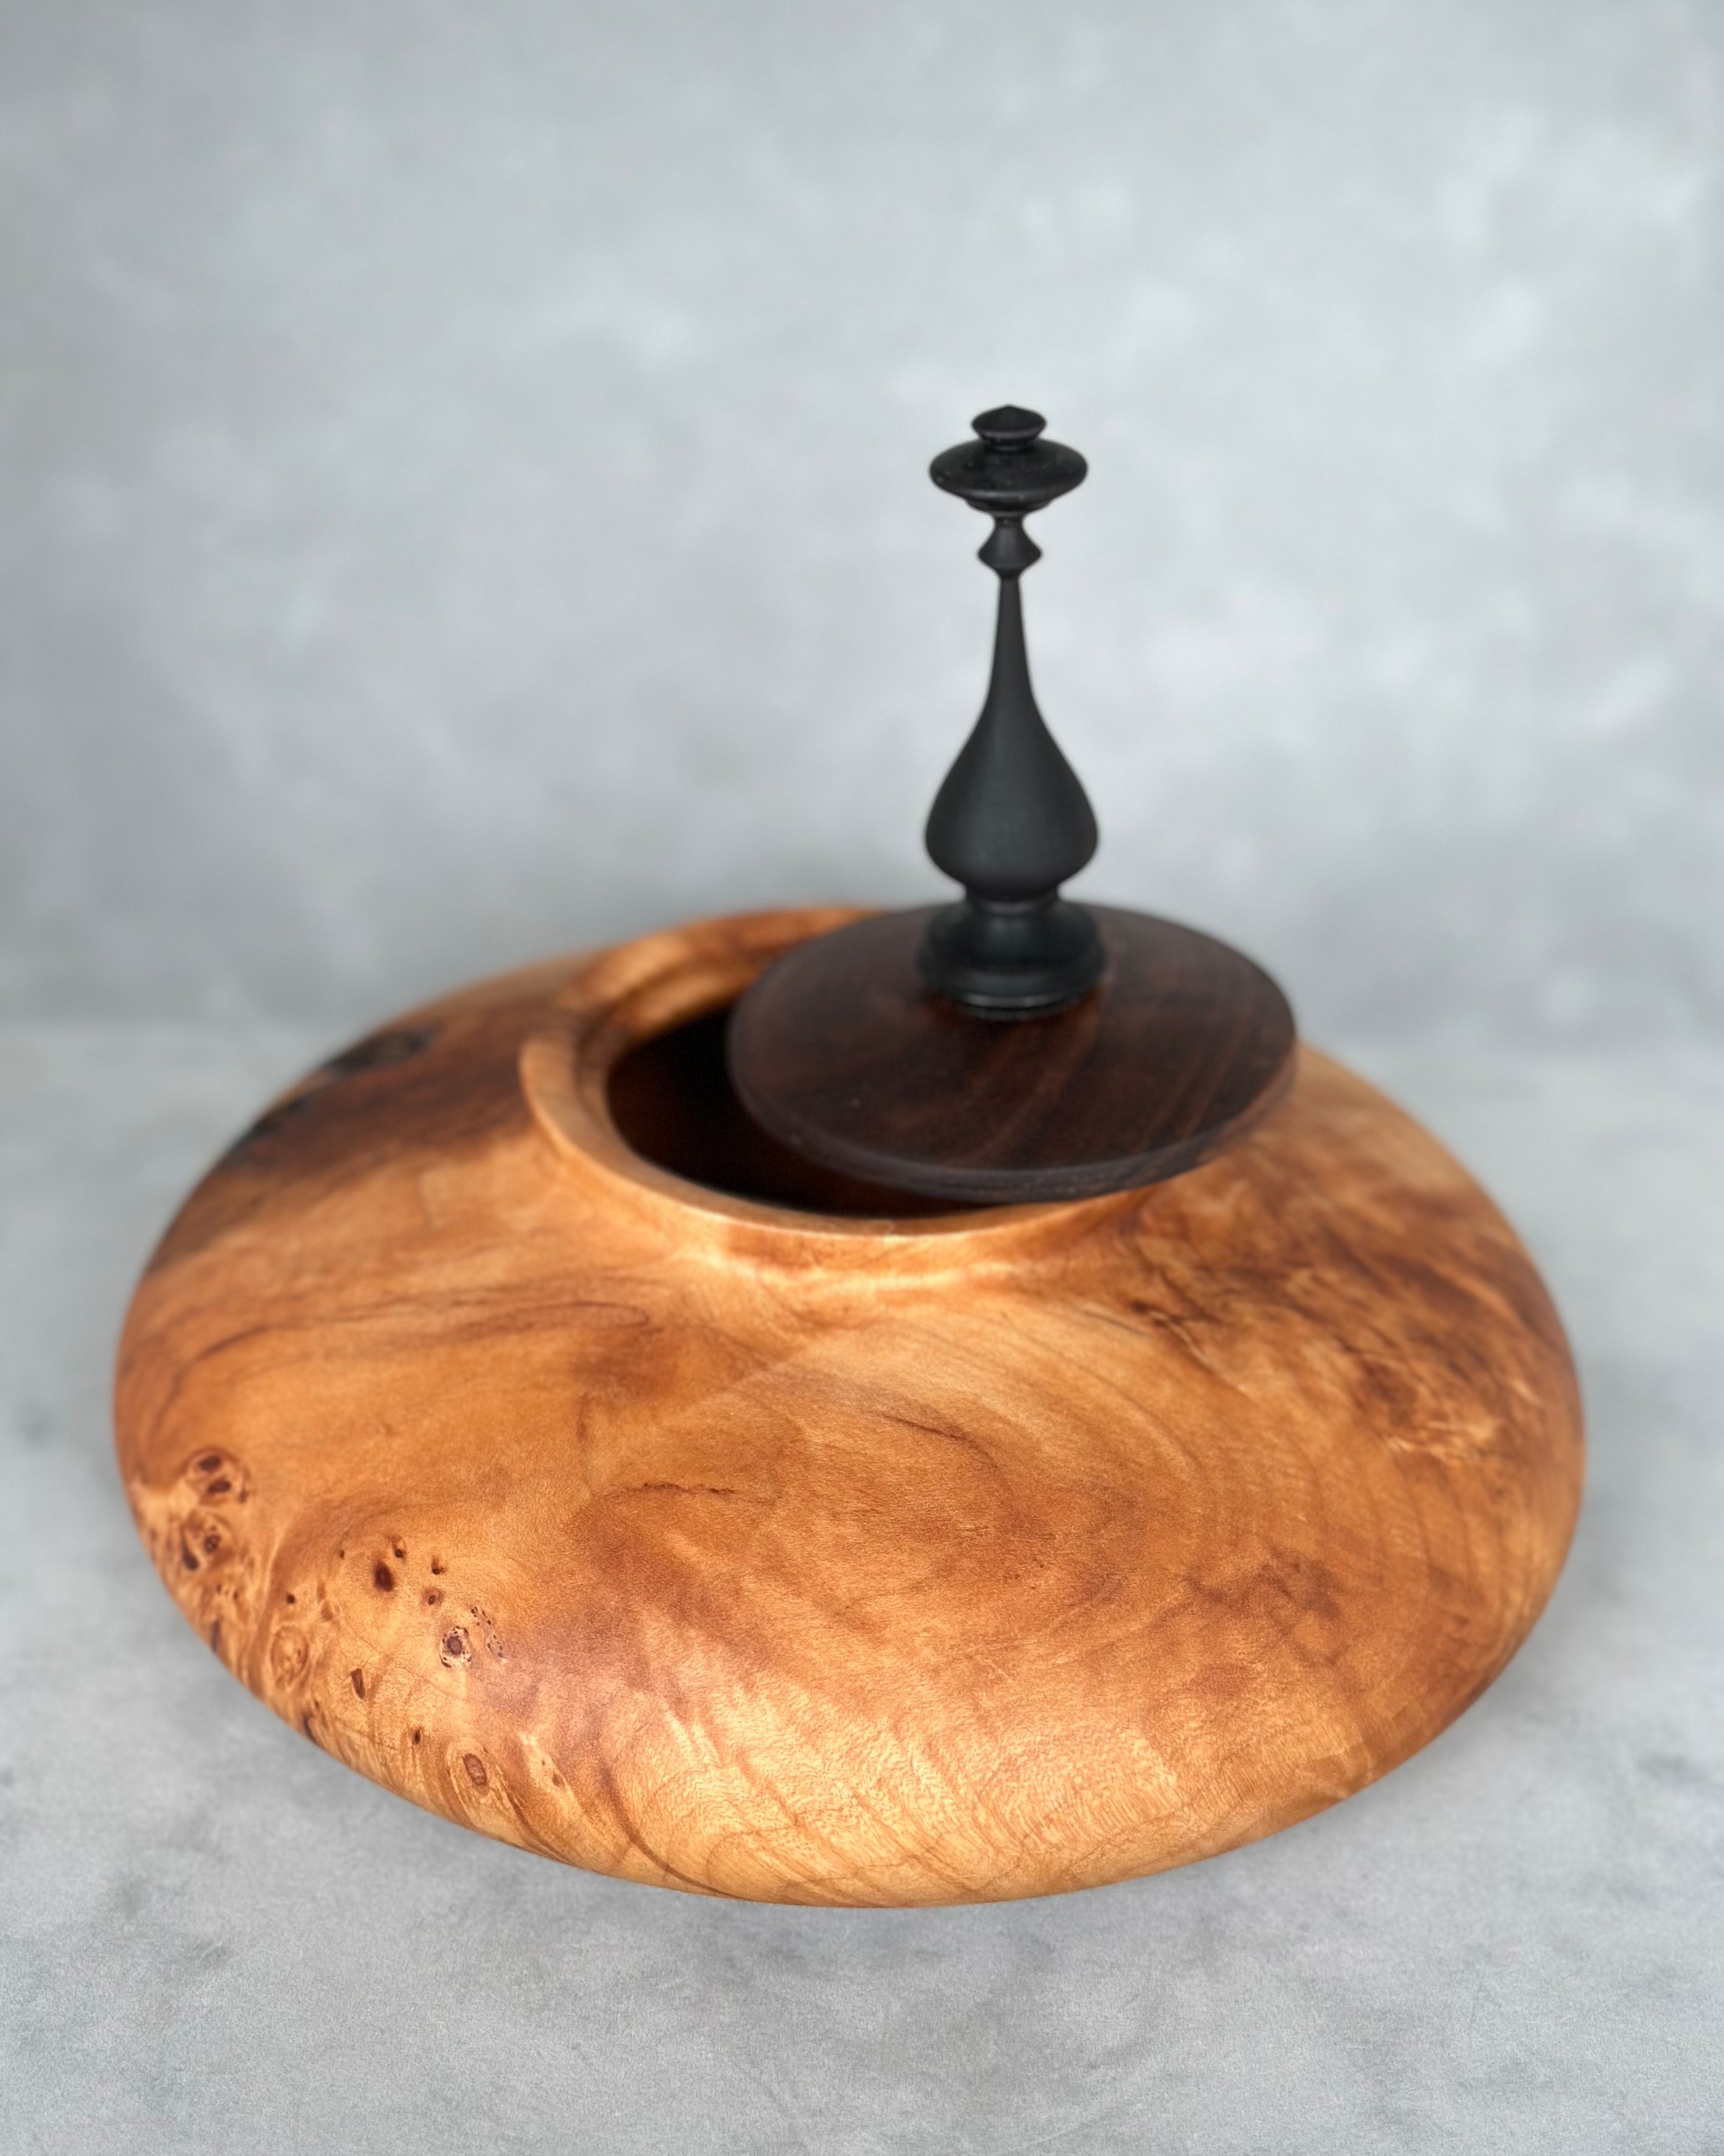 Figured Maple Hollow Form with Black Walnut Lid and African Blackwood Finial